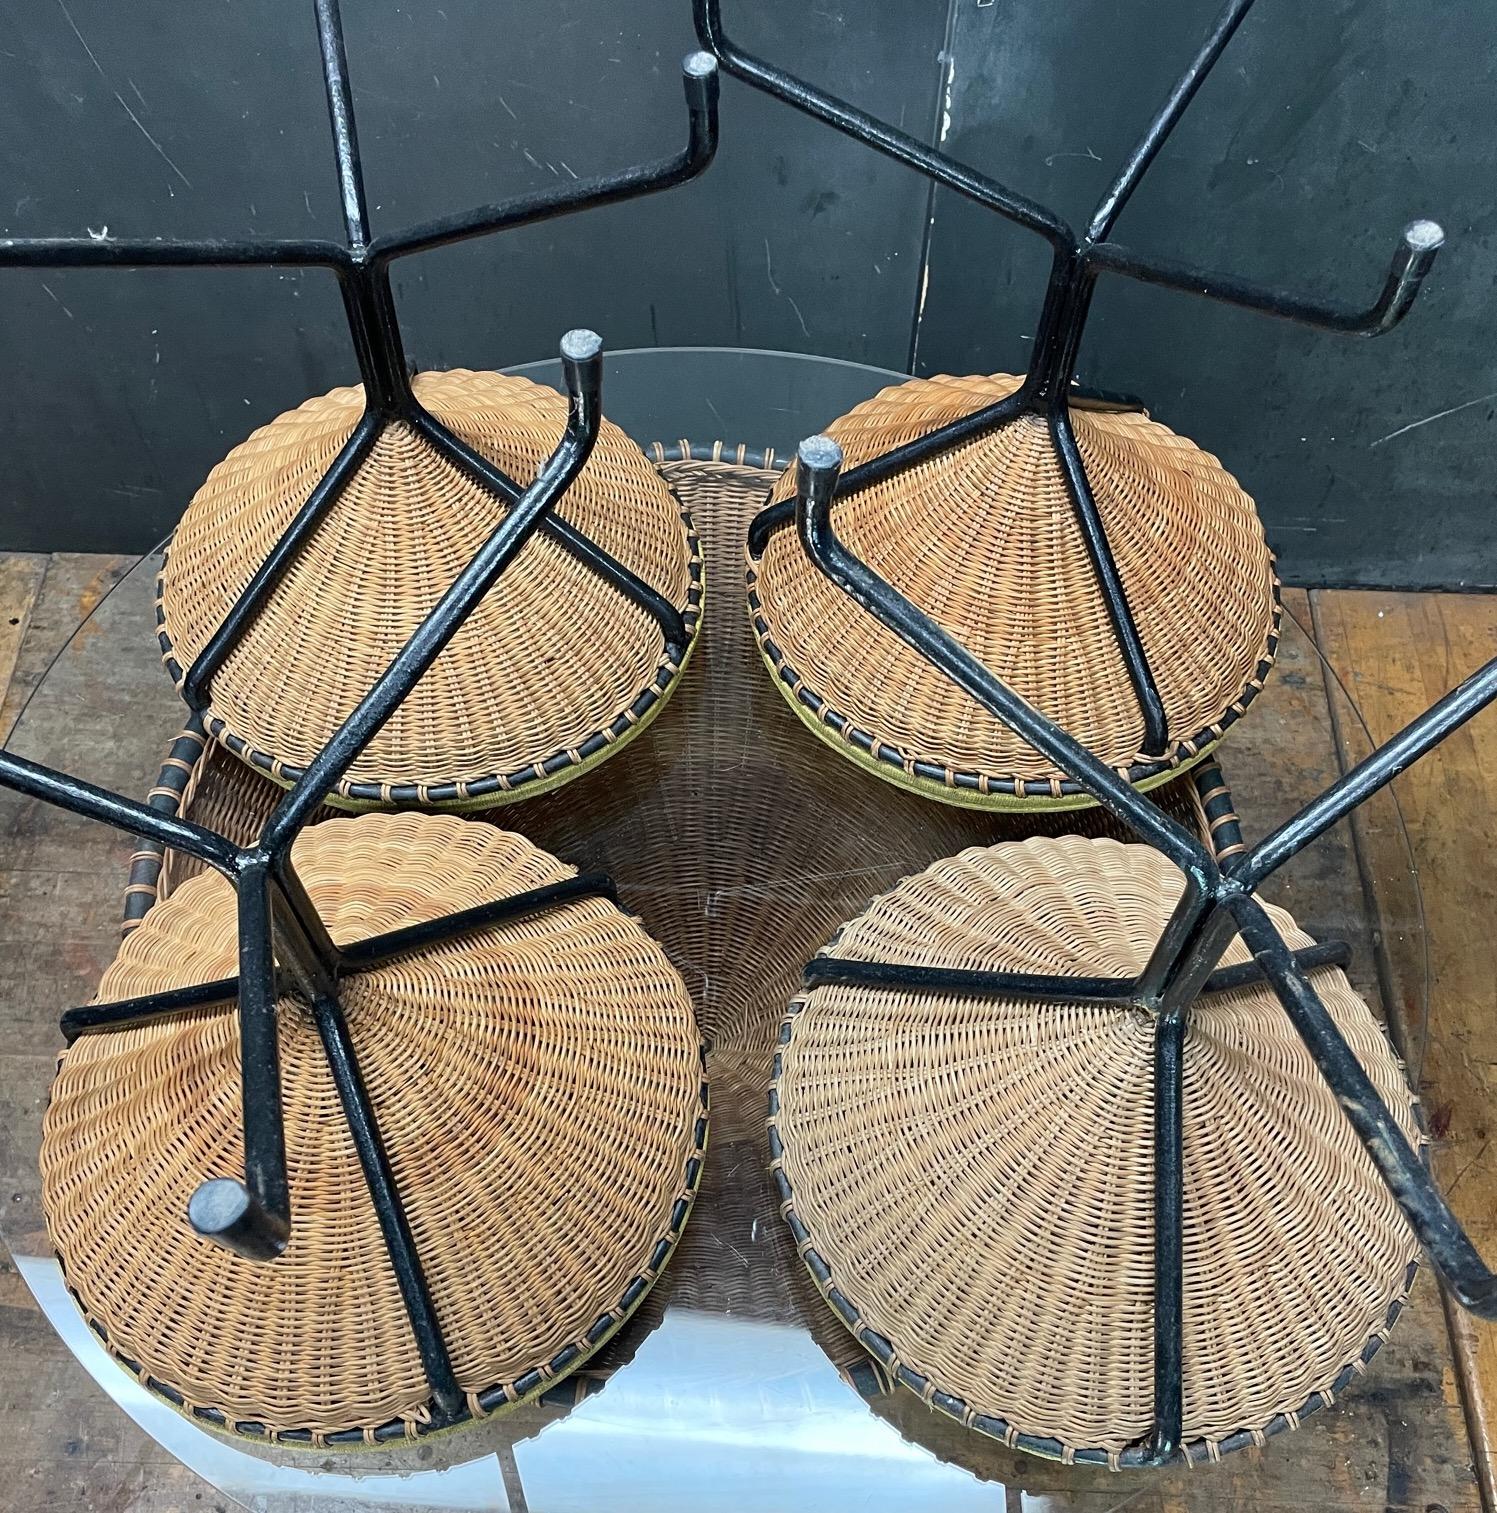 1950s California Design Danny Ho Fong Wicker Iron Tiki Dining Table Stool Set For Sale 2